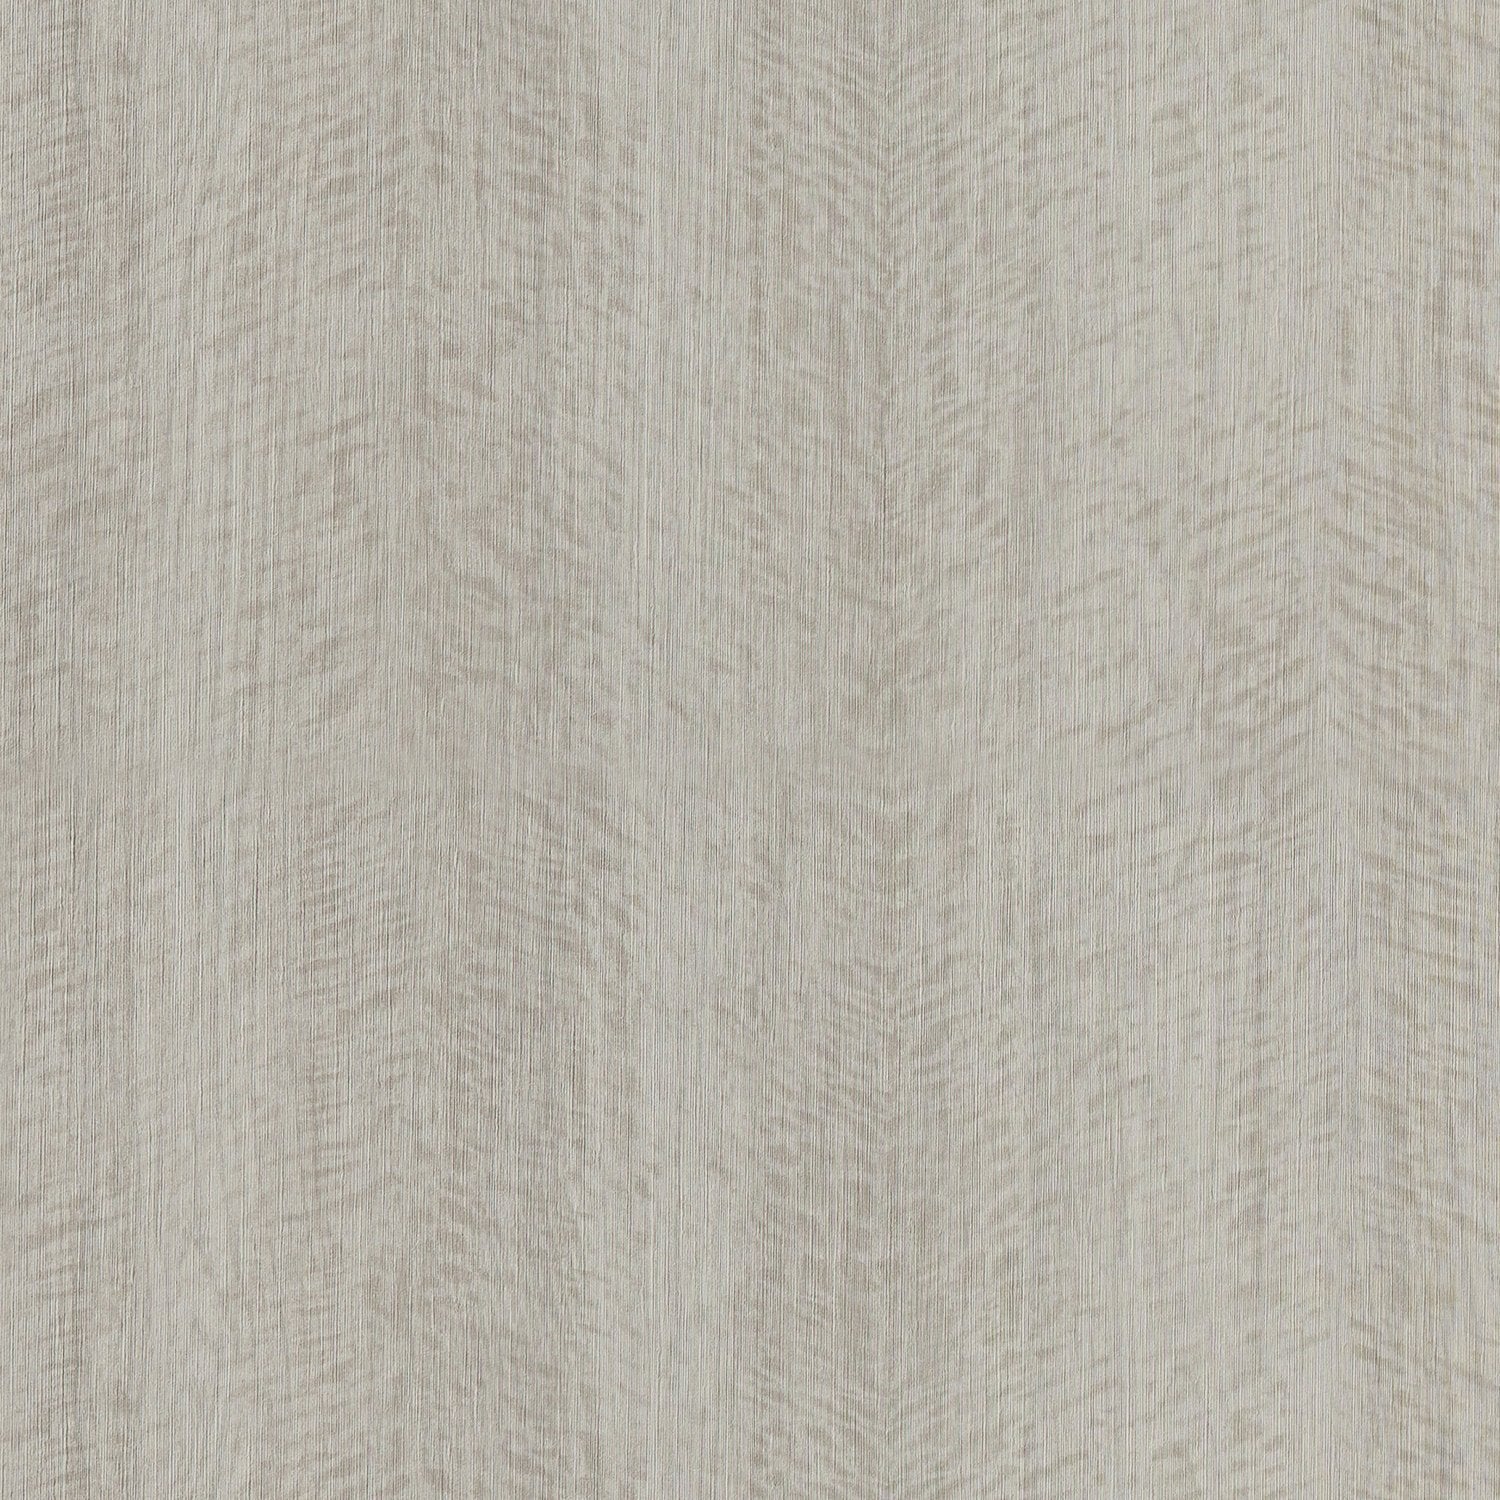 Woodn't It Be Nice - Y47872 - Wallcovering - Vycon - Kube Contract